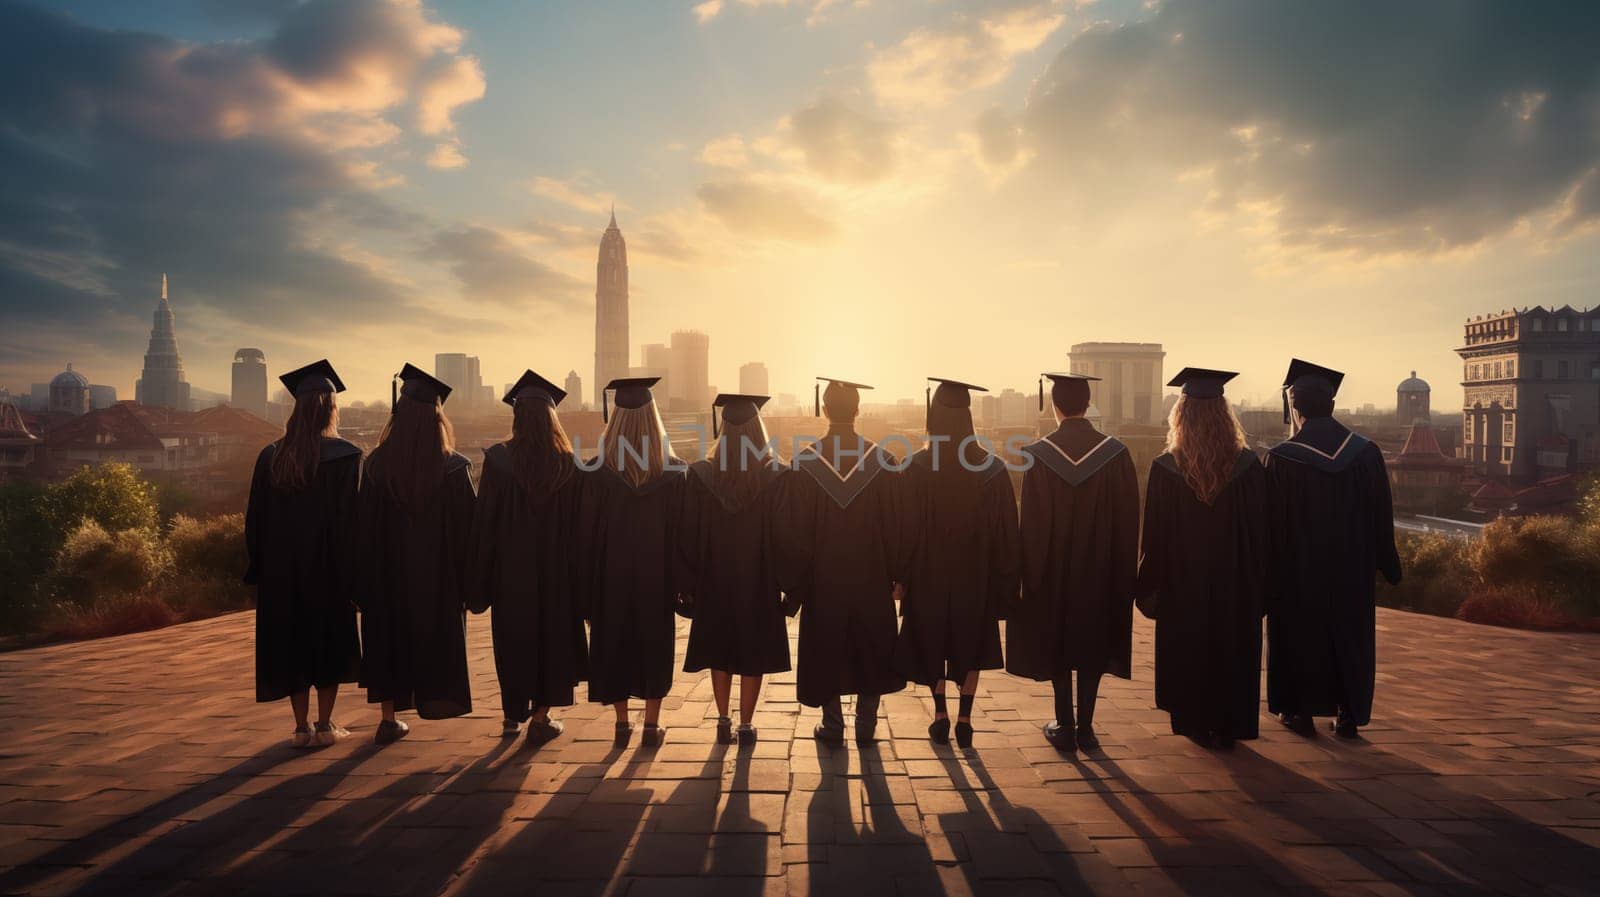 A rear view of a group of graduates, silhouettes standing outdoors, against the sunset by Zakharova